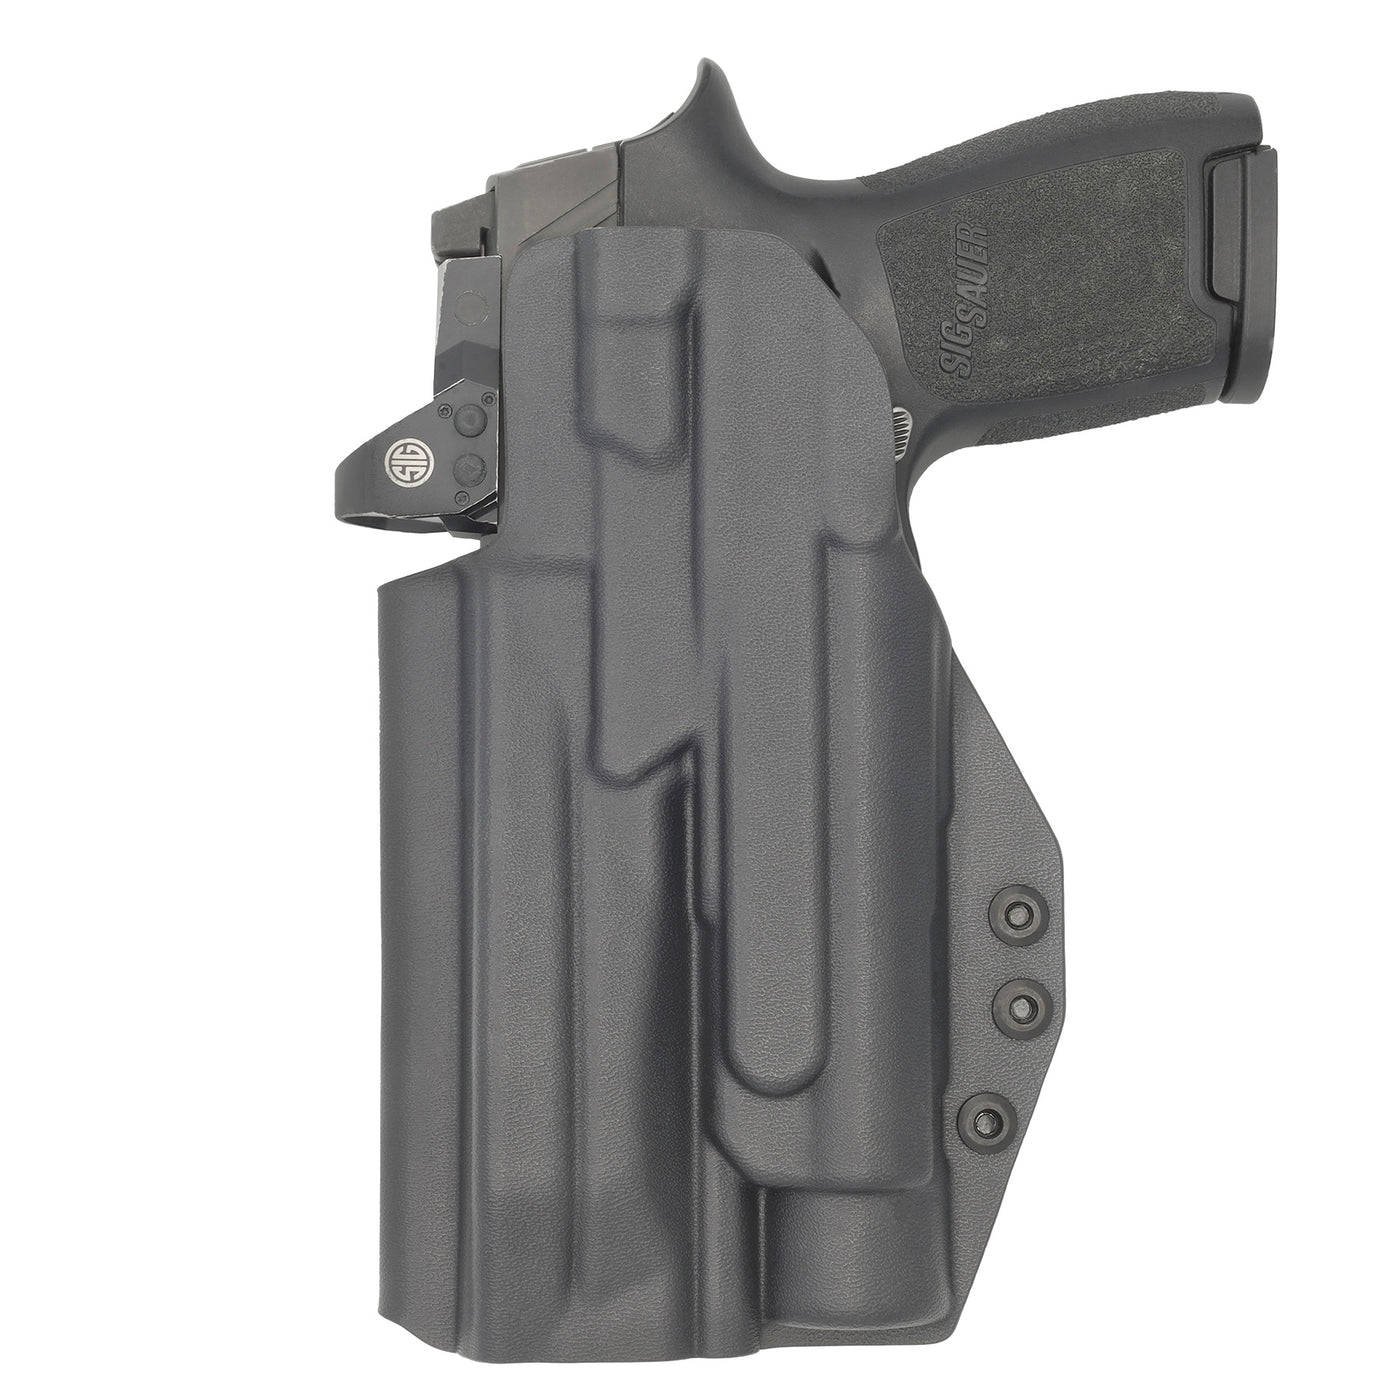 C&G Holsters custom IWB Tactical Springfield XD-M Elite Streamlight TLR1 in holstered position back view